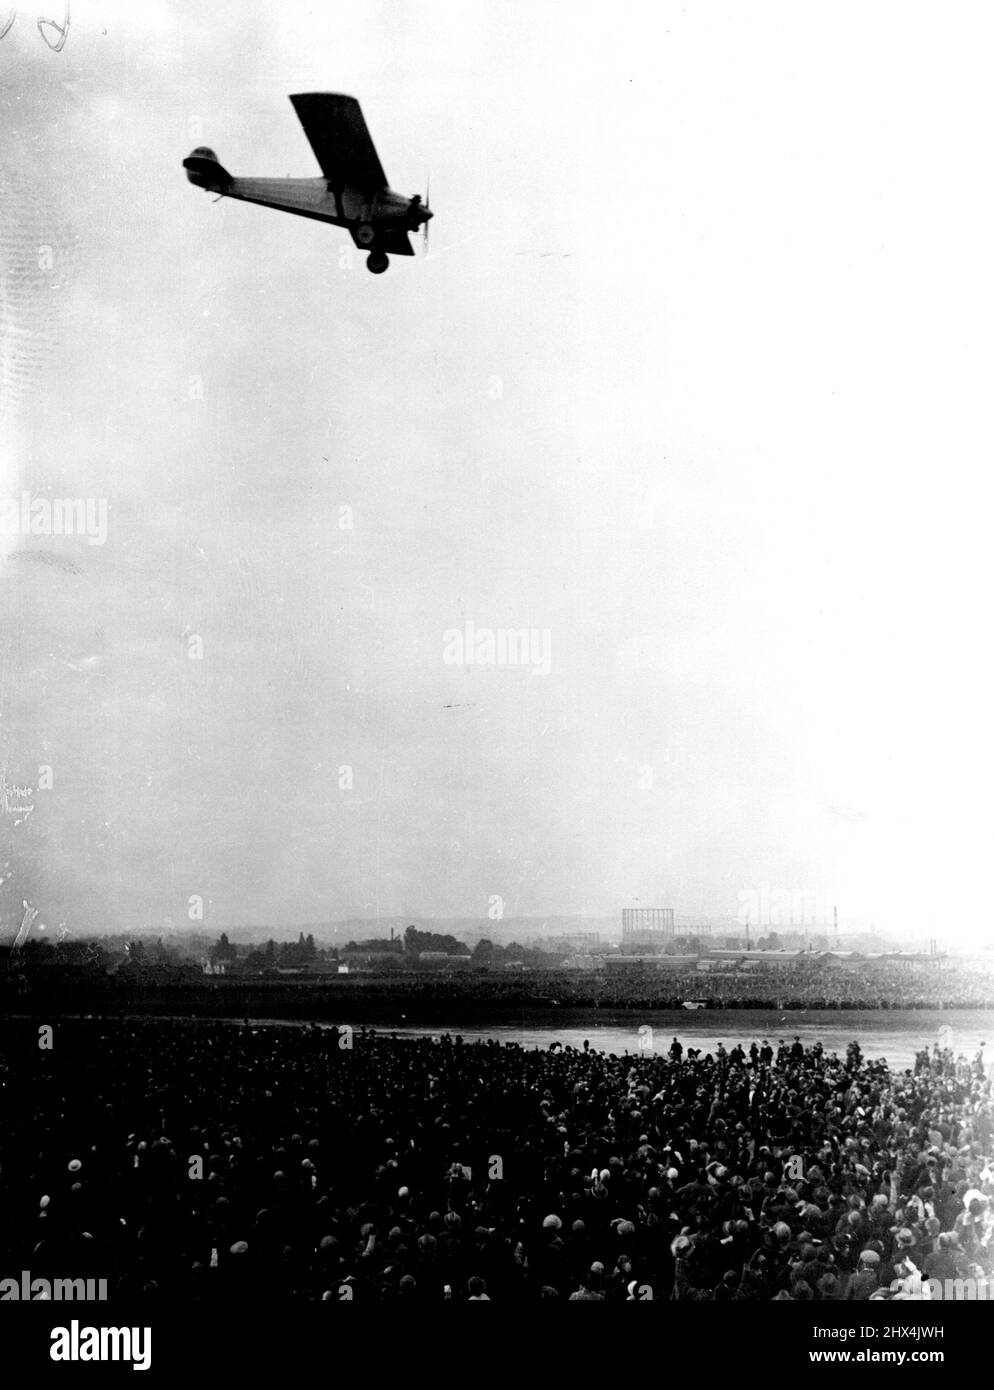 Arrival of Captain Lindbergh the lone Atlantic Flier, at Croydon Aerodrome. The great welcome given to Lindbergh on his arrival, flying over the crowd. July 06, 1927. (Photo by Topical Press Agency). Stock Photo